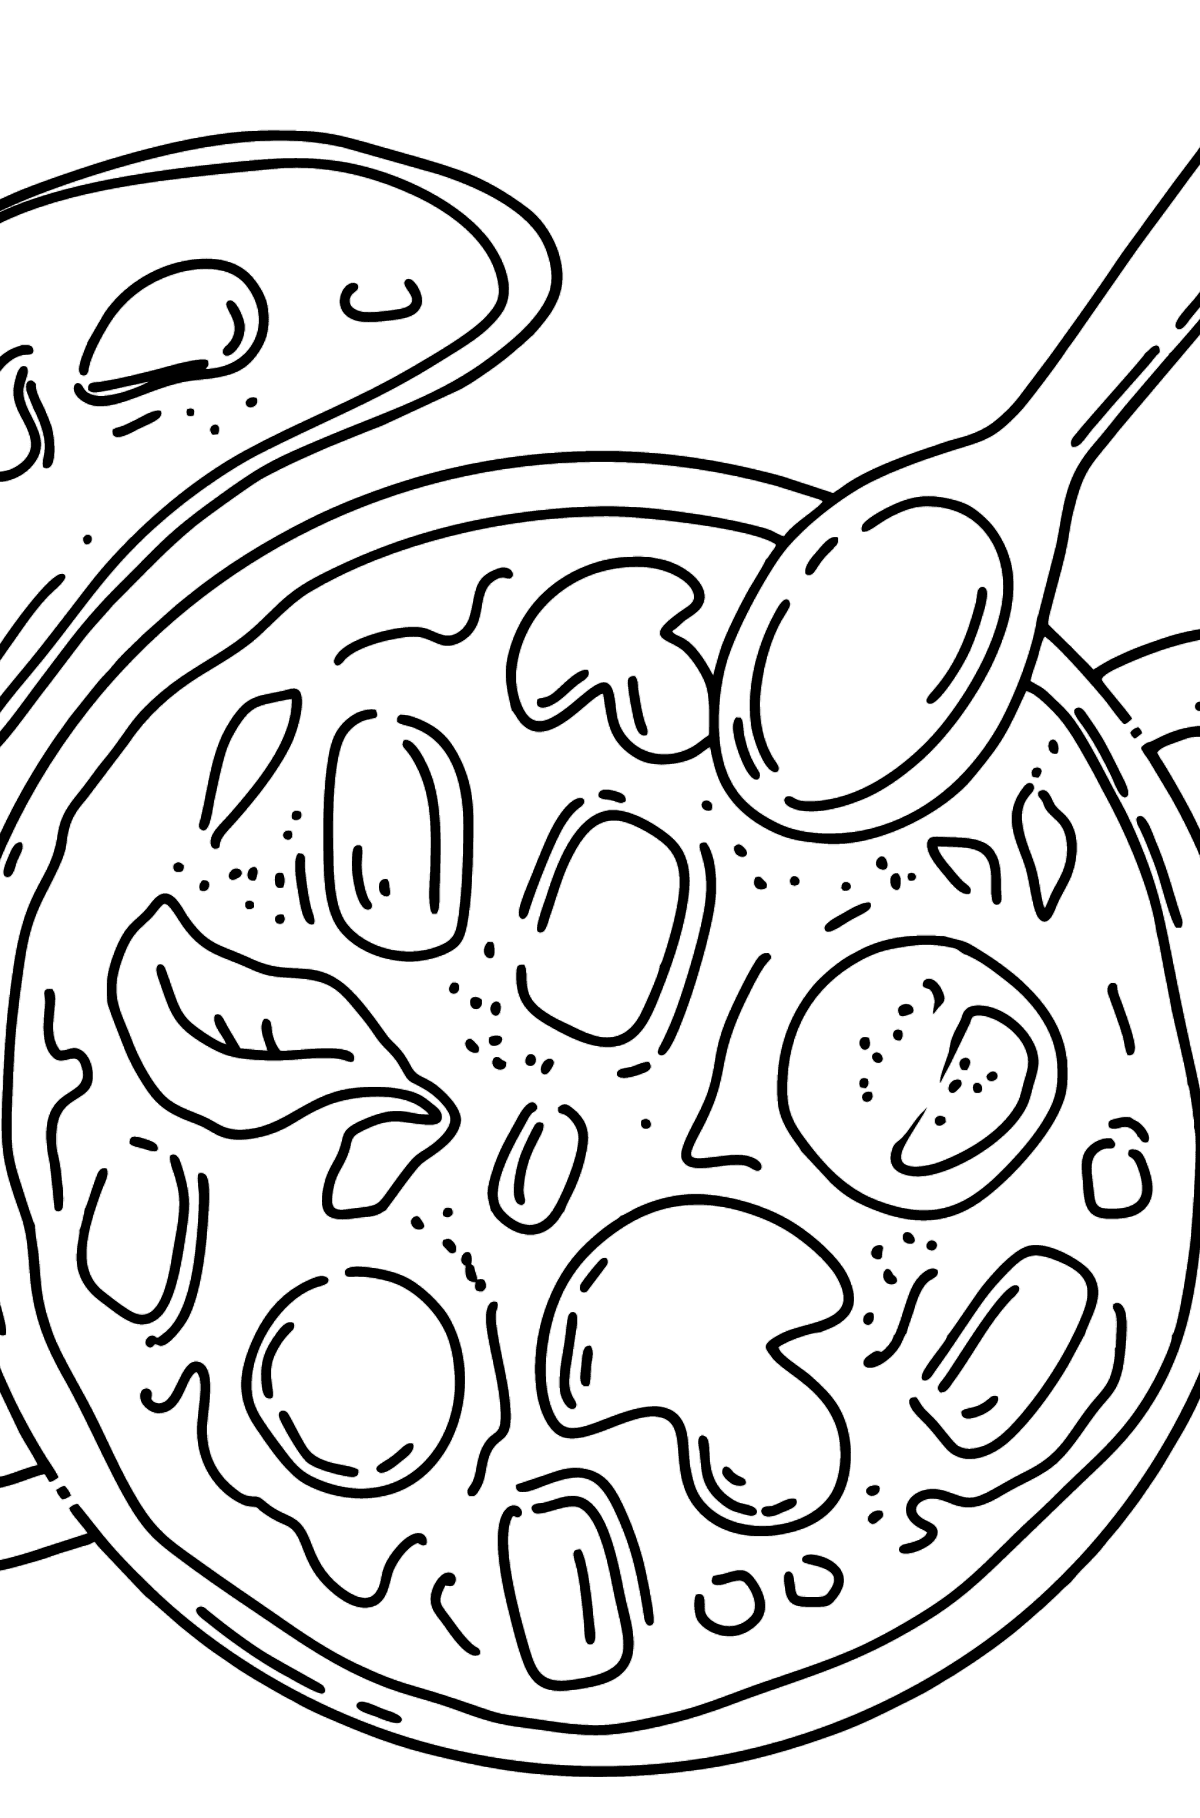 Lunch coloring page - soup - Coloring Pages for Kids